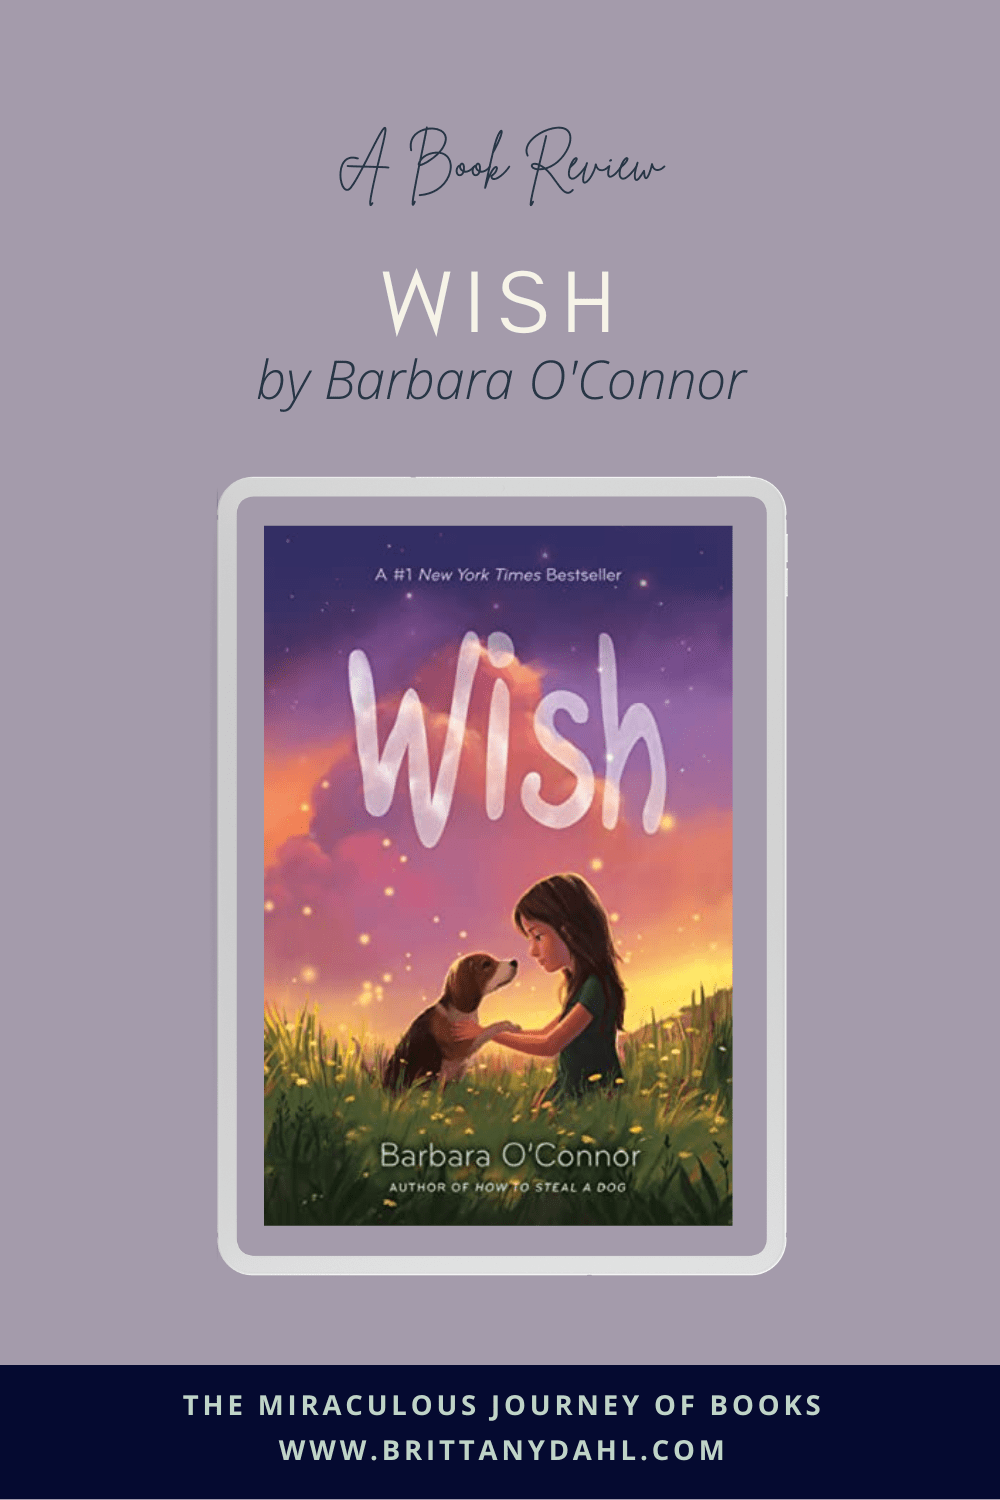 A Book Review of Wish by Barbara O'Connor from The Miraculous Journey of Books at BrittanyDahl.com